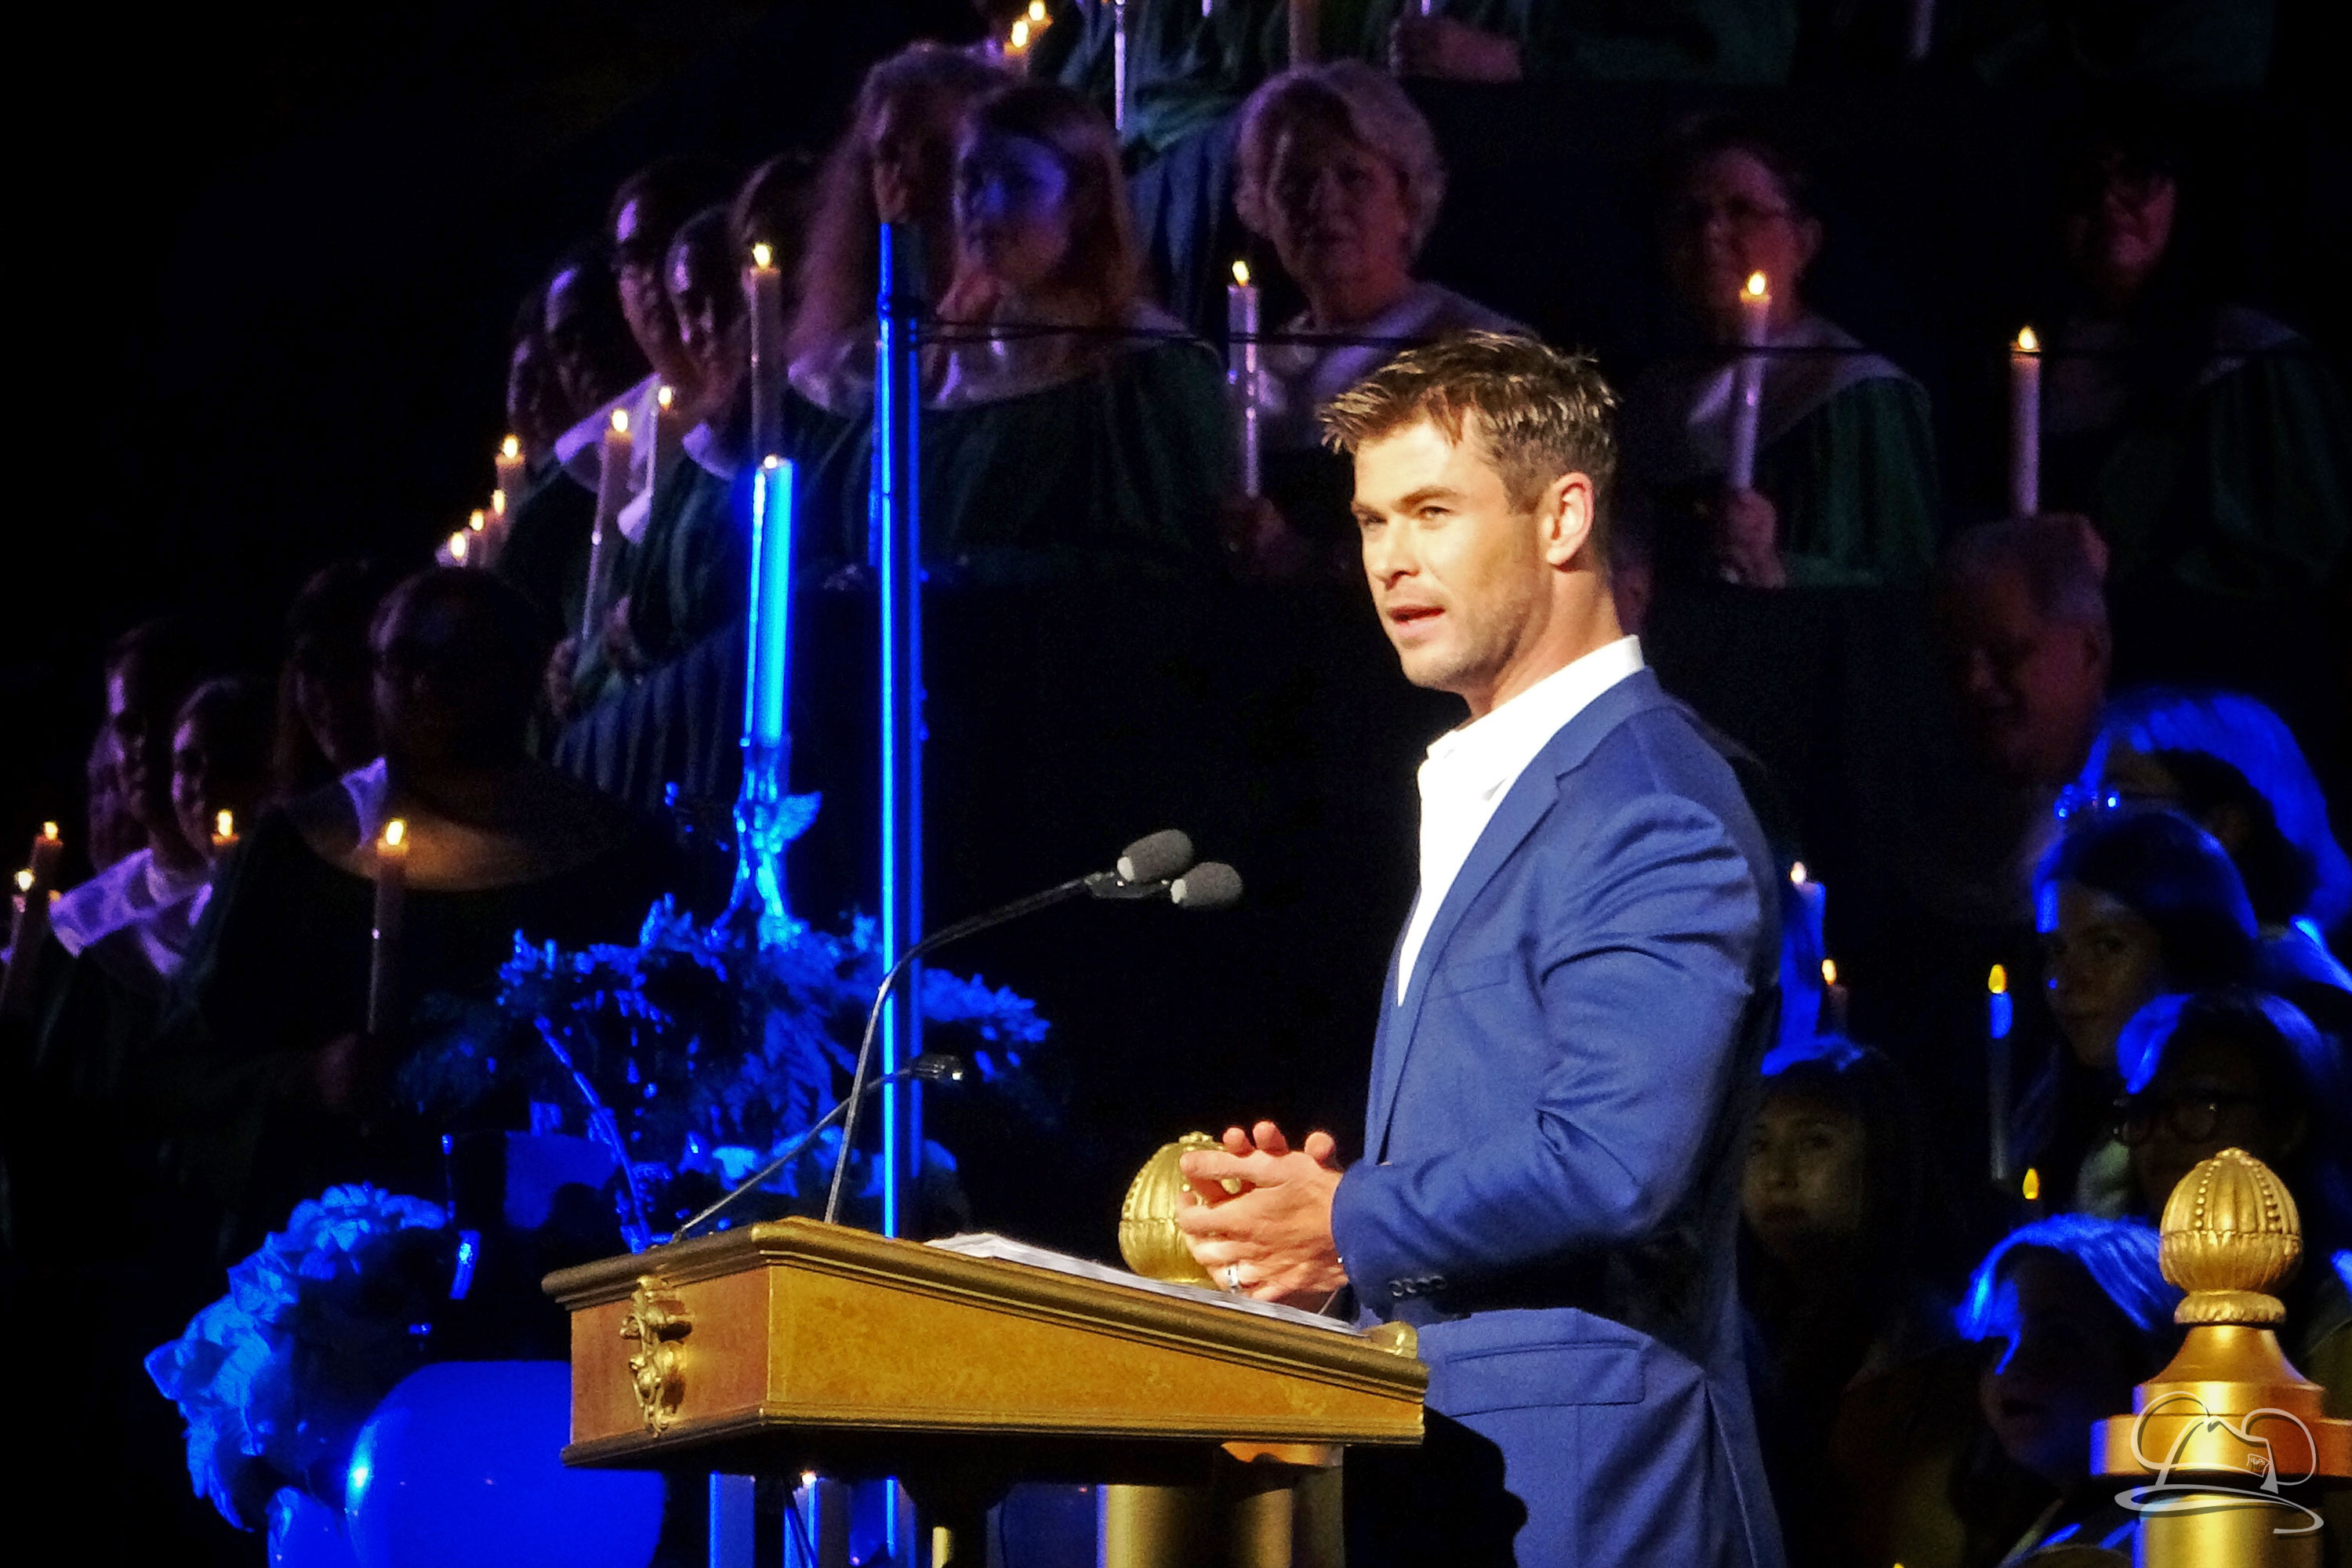 Chris Hemsworth Narrating Disneyland's Candlelight Processional and Ceremony